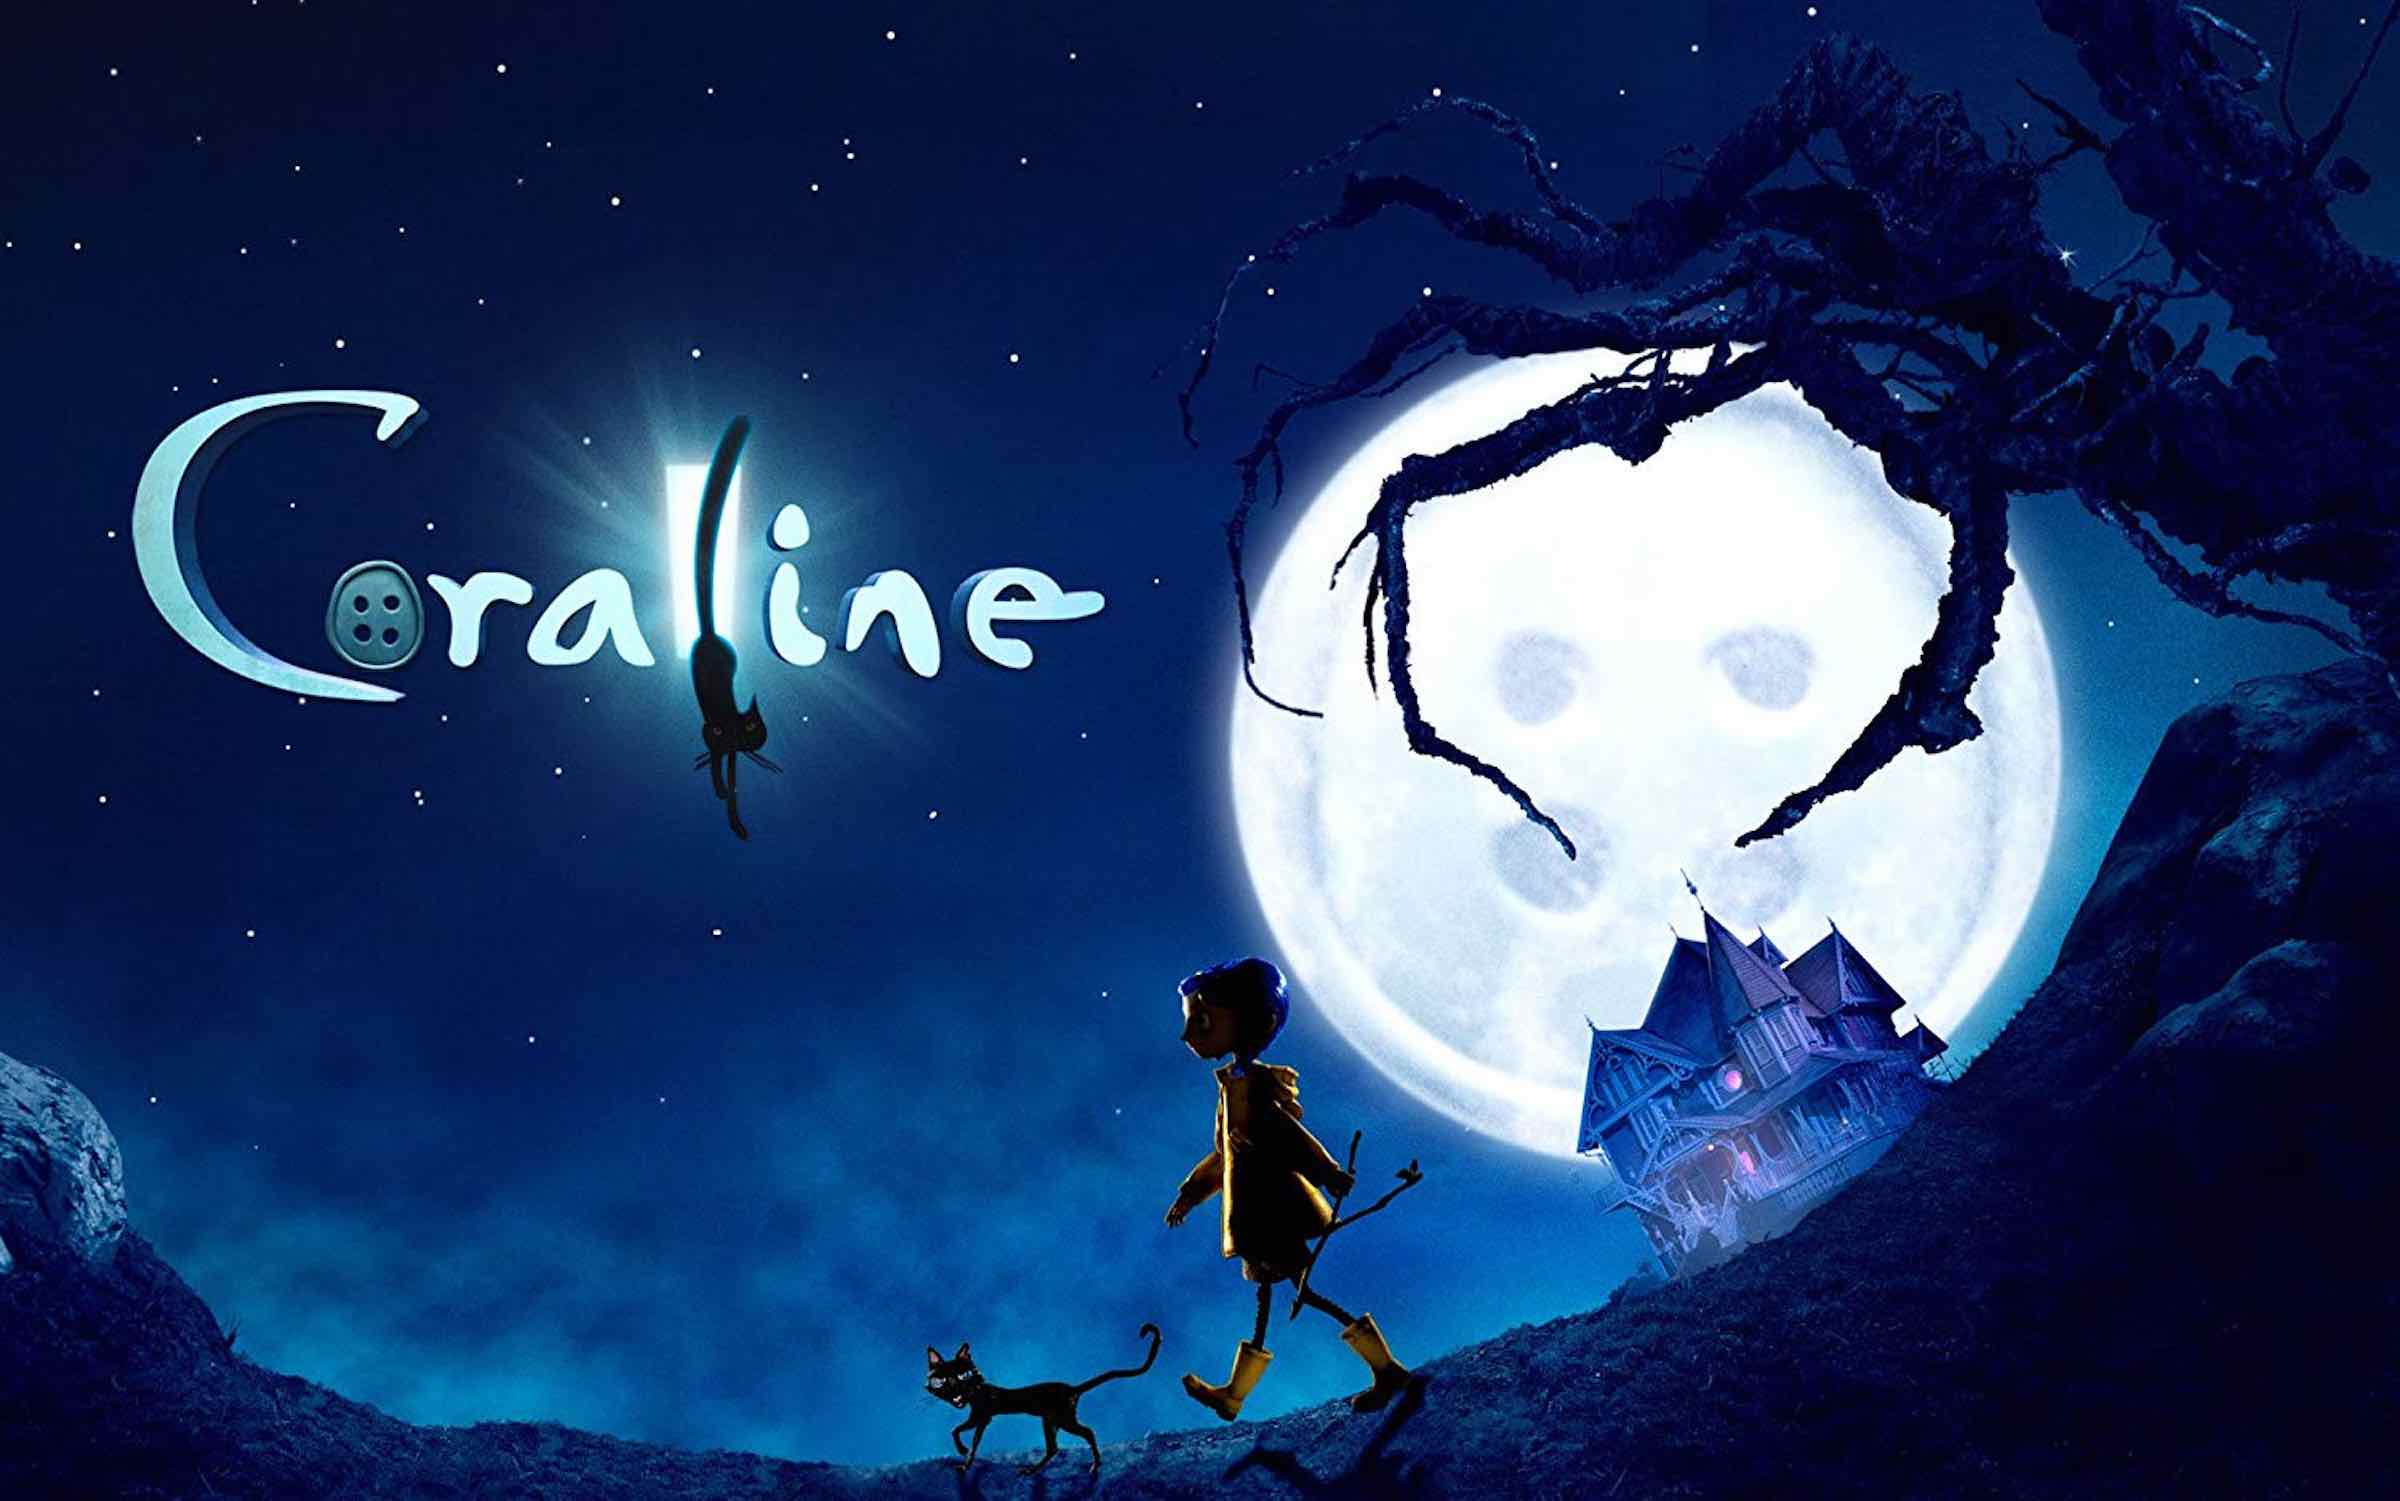 Are your eyes buttons? If not, then you can take our 'Coraline' quiz! One of the spookiest animations ever, remember to be careful what you wish for.